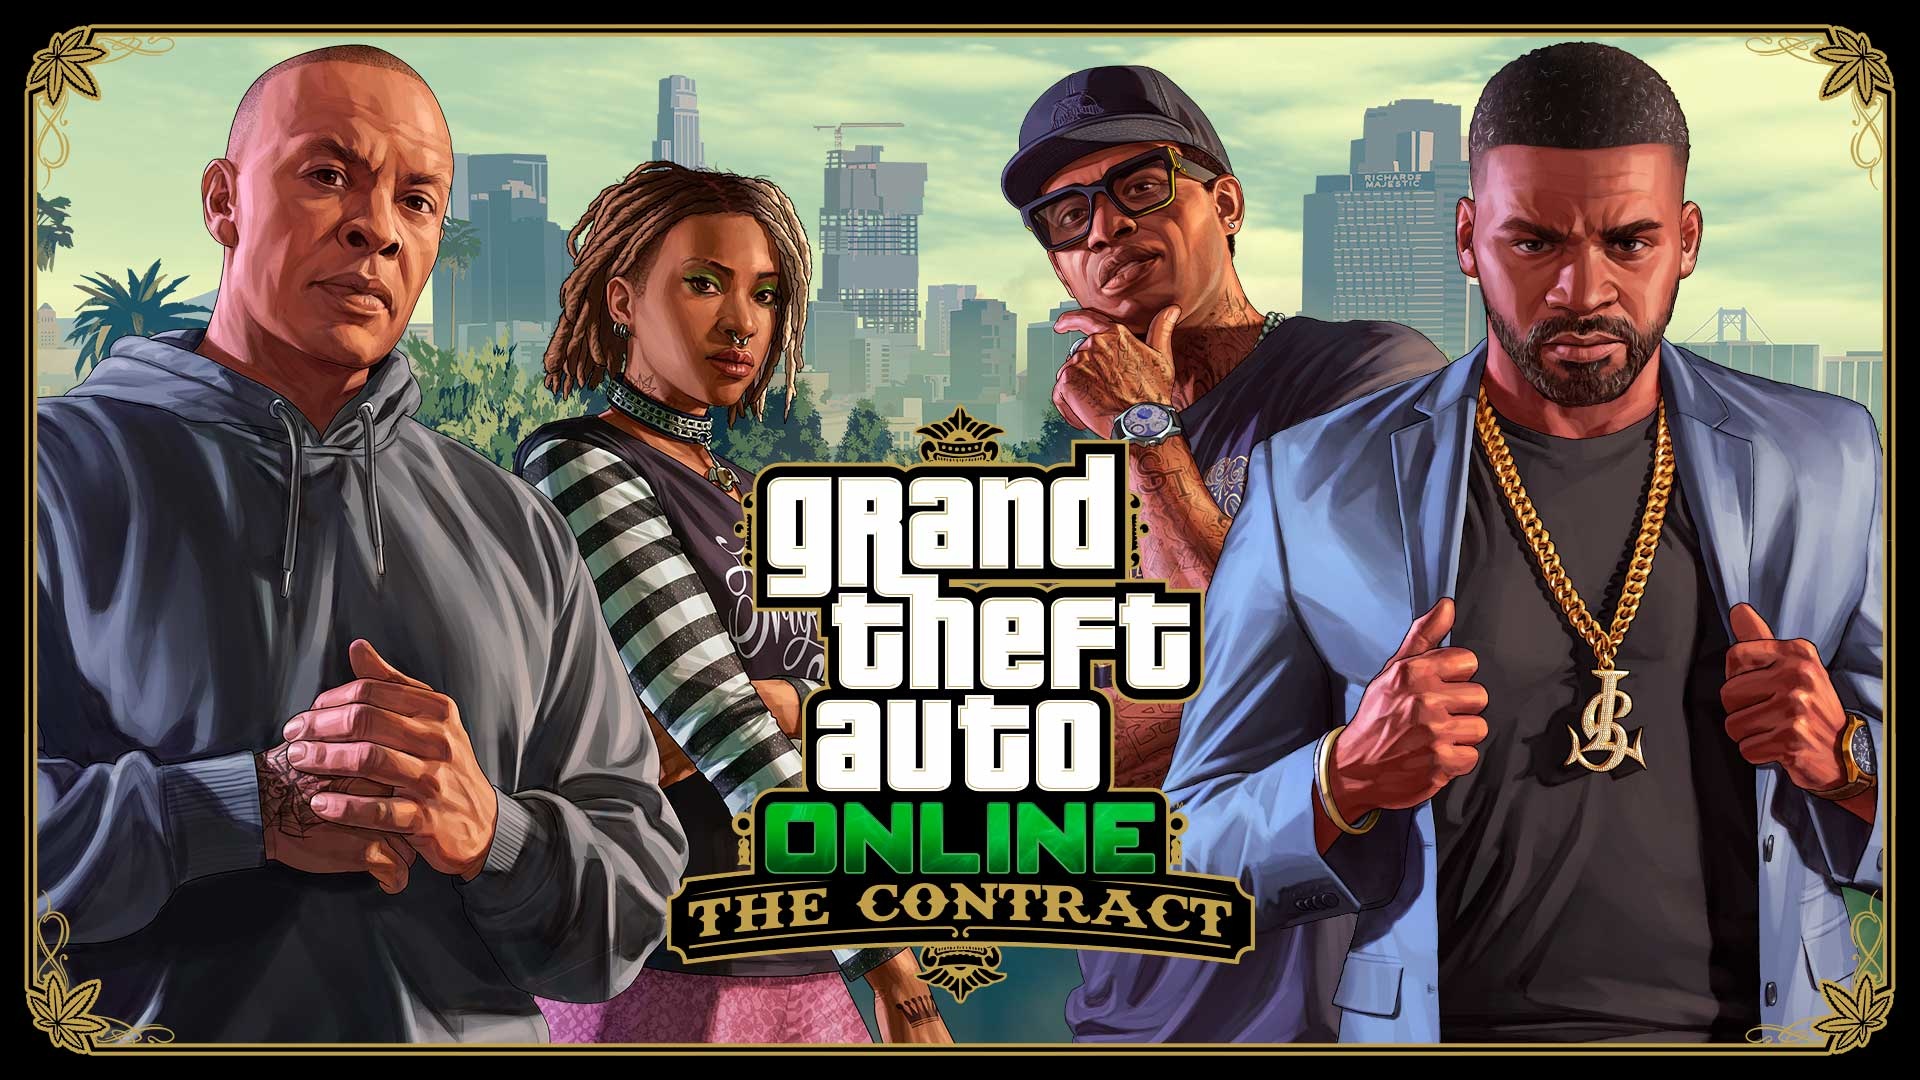 (In The Contract update for GTA Online, Dr. Dre played a leading role. That 50 Cent is involved in a similar project at Rockstar would not be that unlikely.)